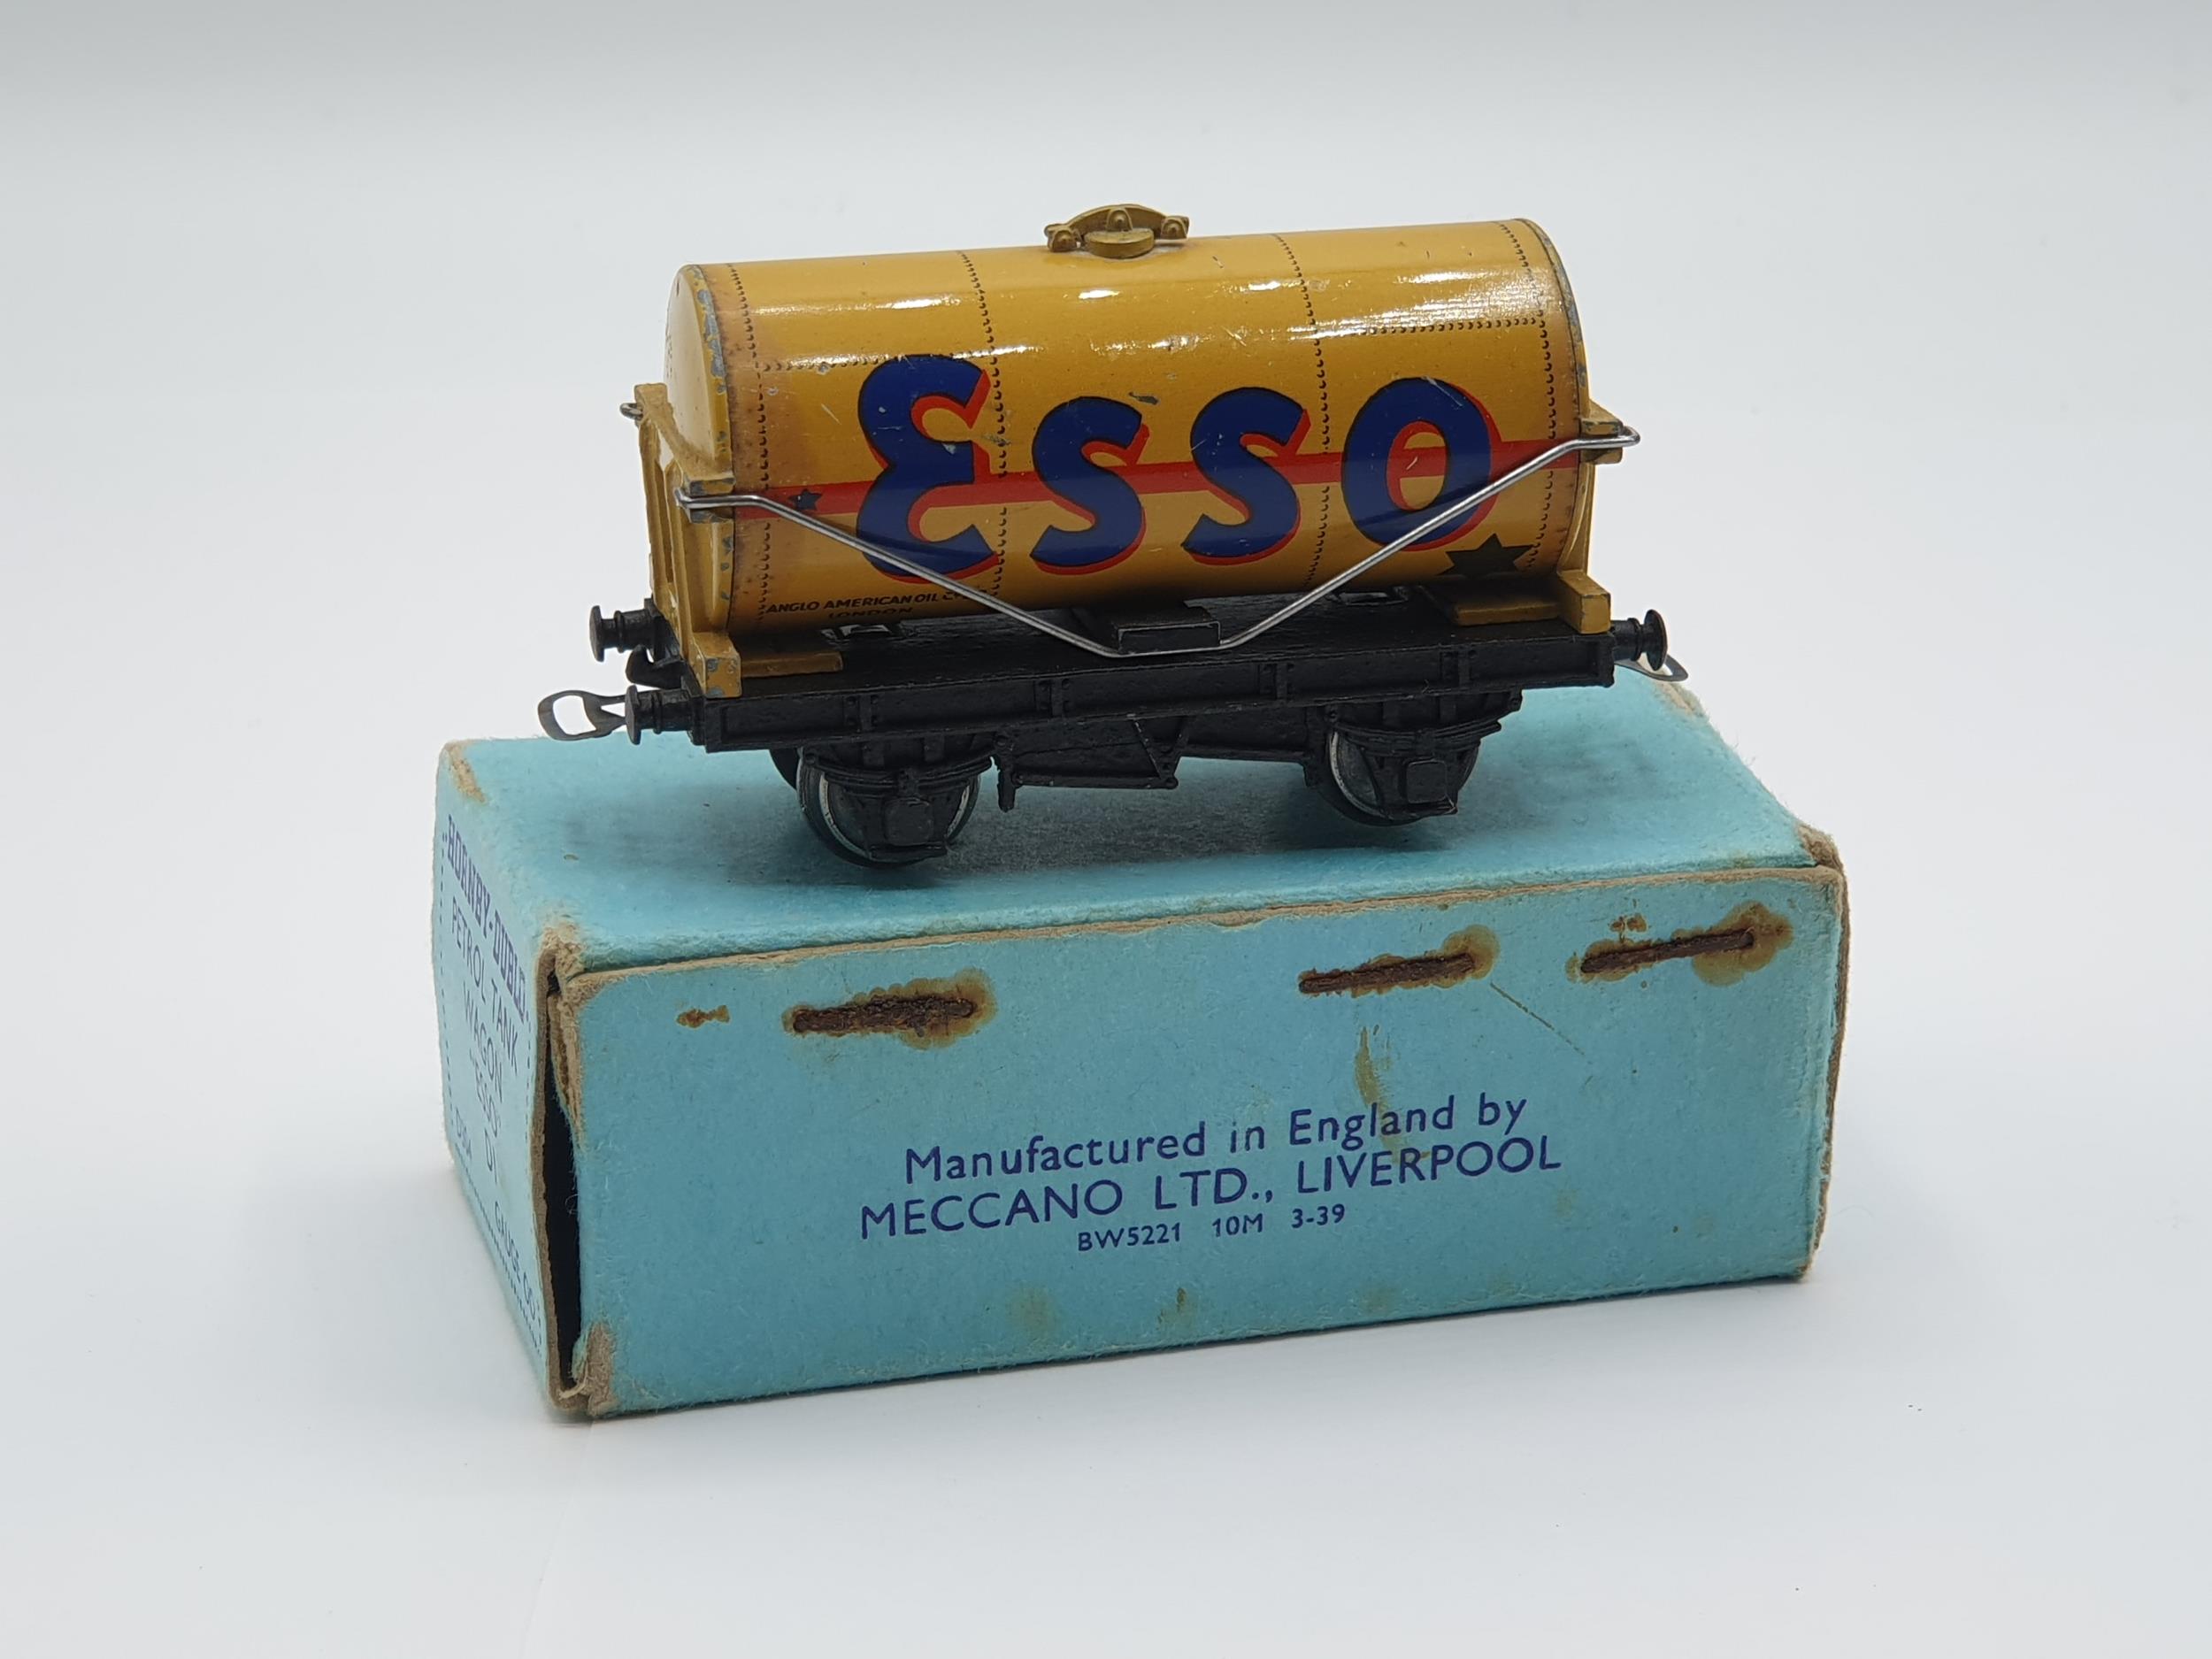 A boxed Hornby Dublo pre-war D1 buff 'Esso' Tanker, generally in excellent condition without fatigue